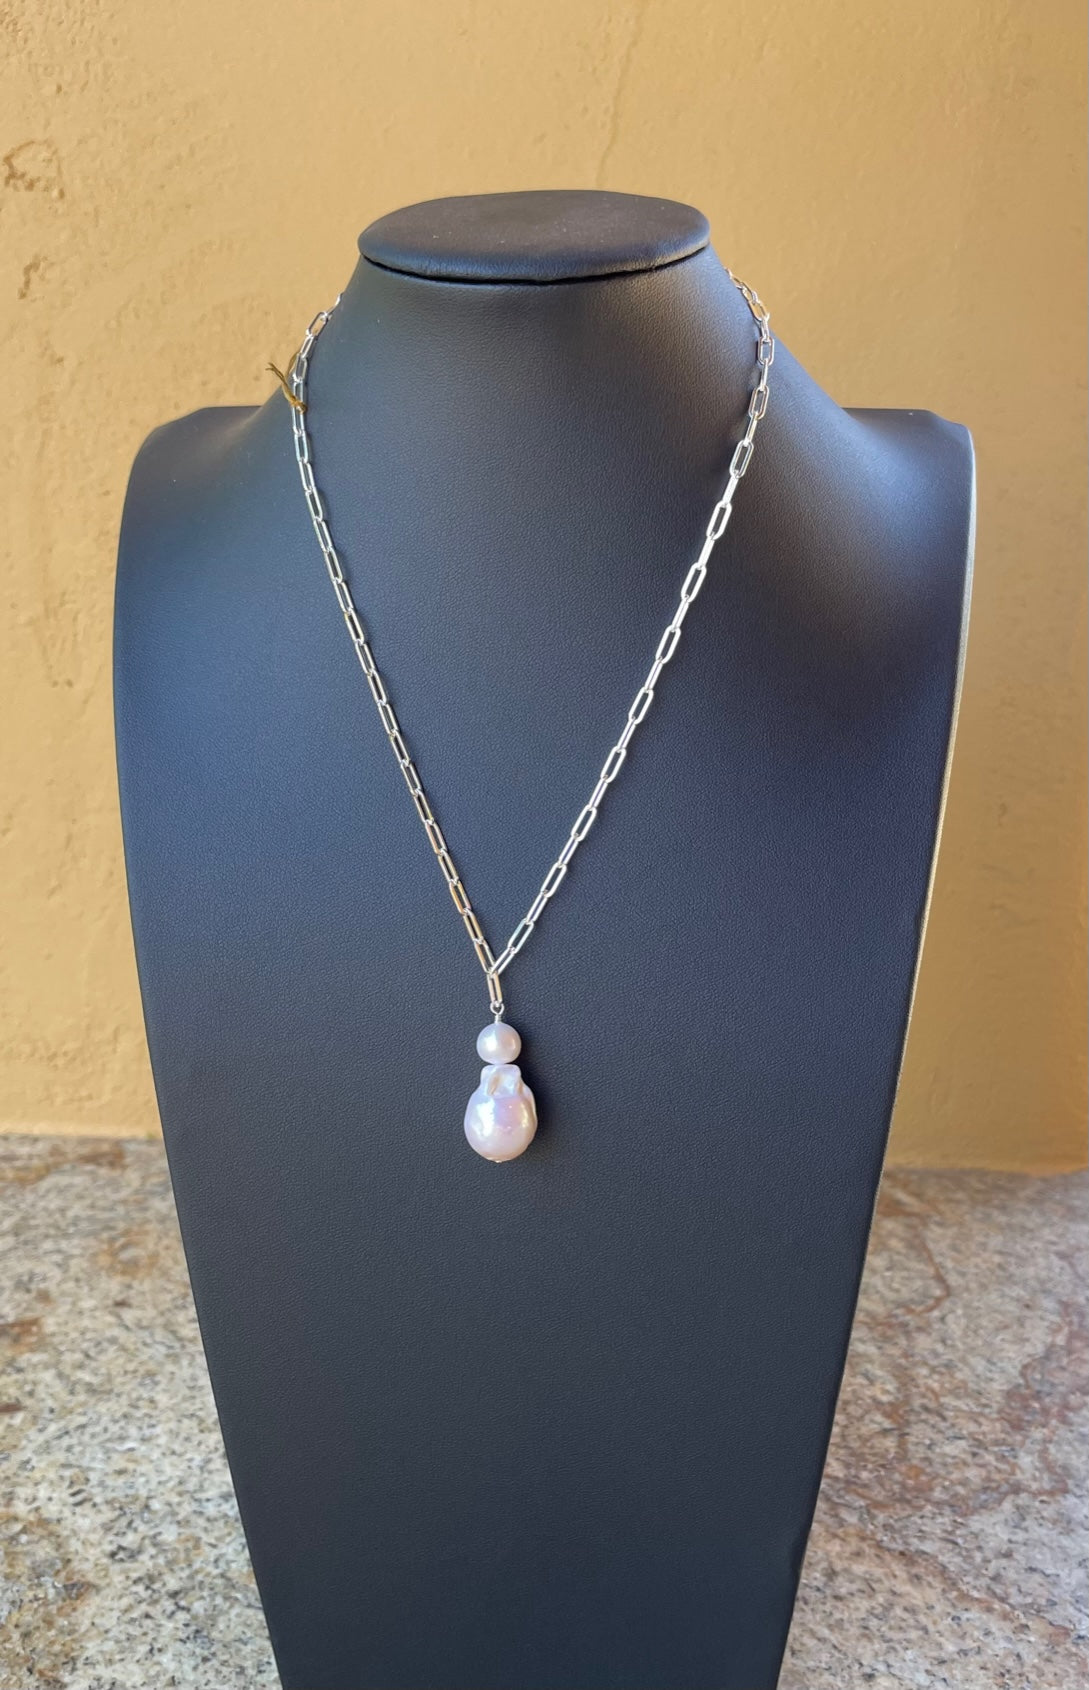 Necklace - Sterling silver paperclip chain with white fresh water pearl pendant